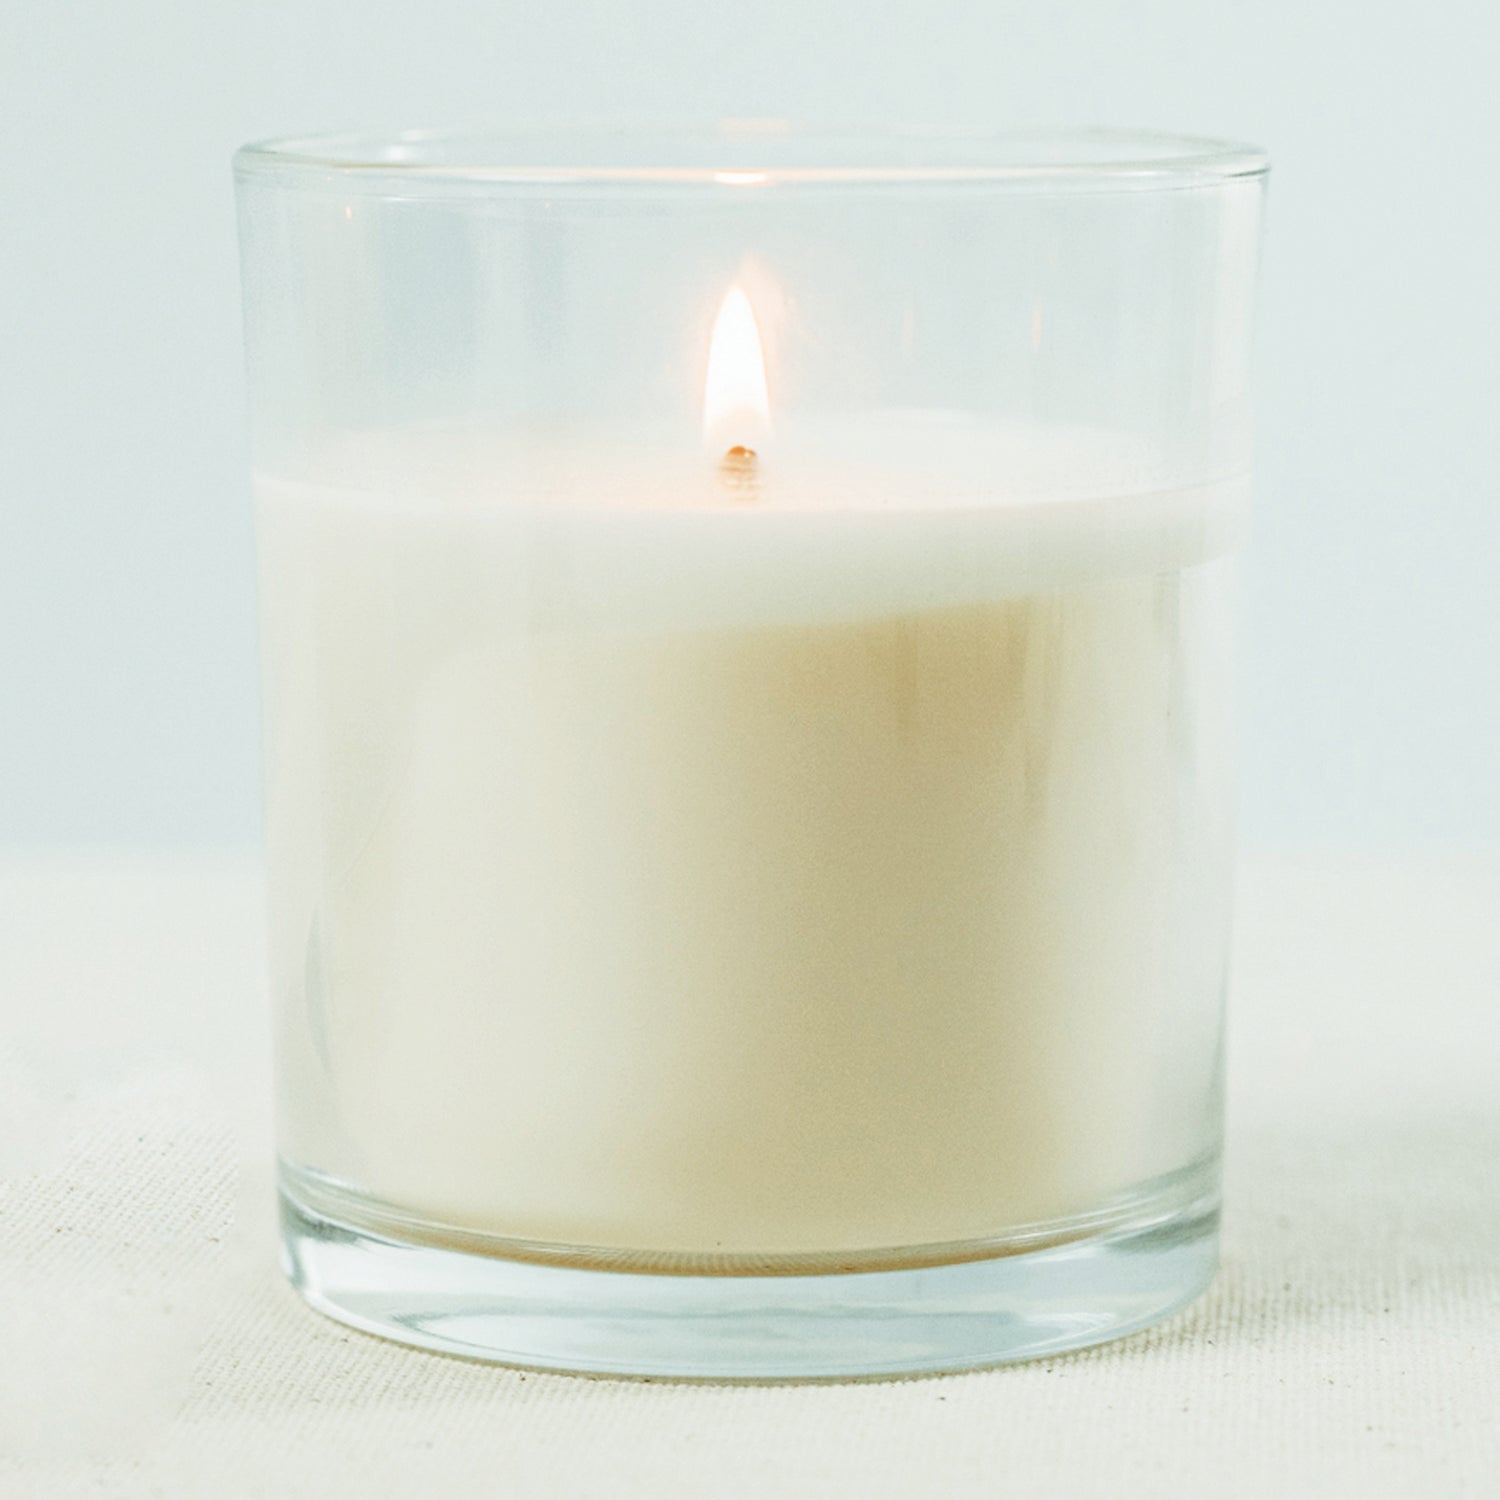 Crafting Soy Wax Candles at Home